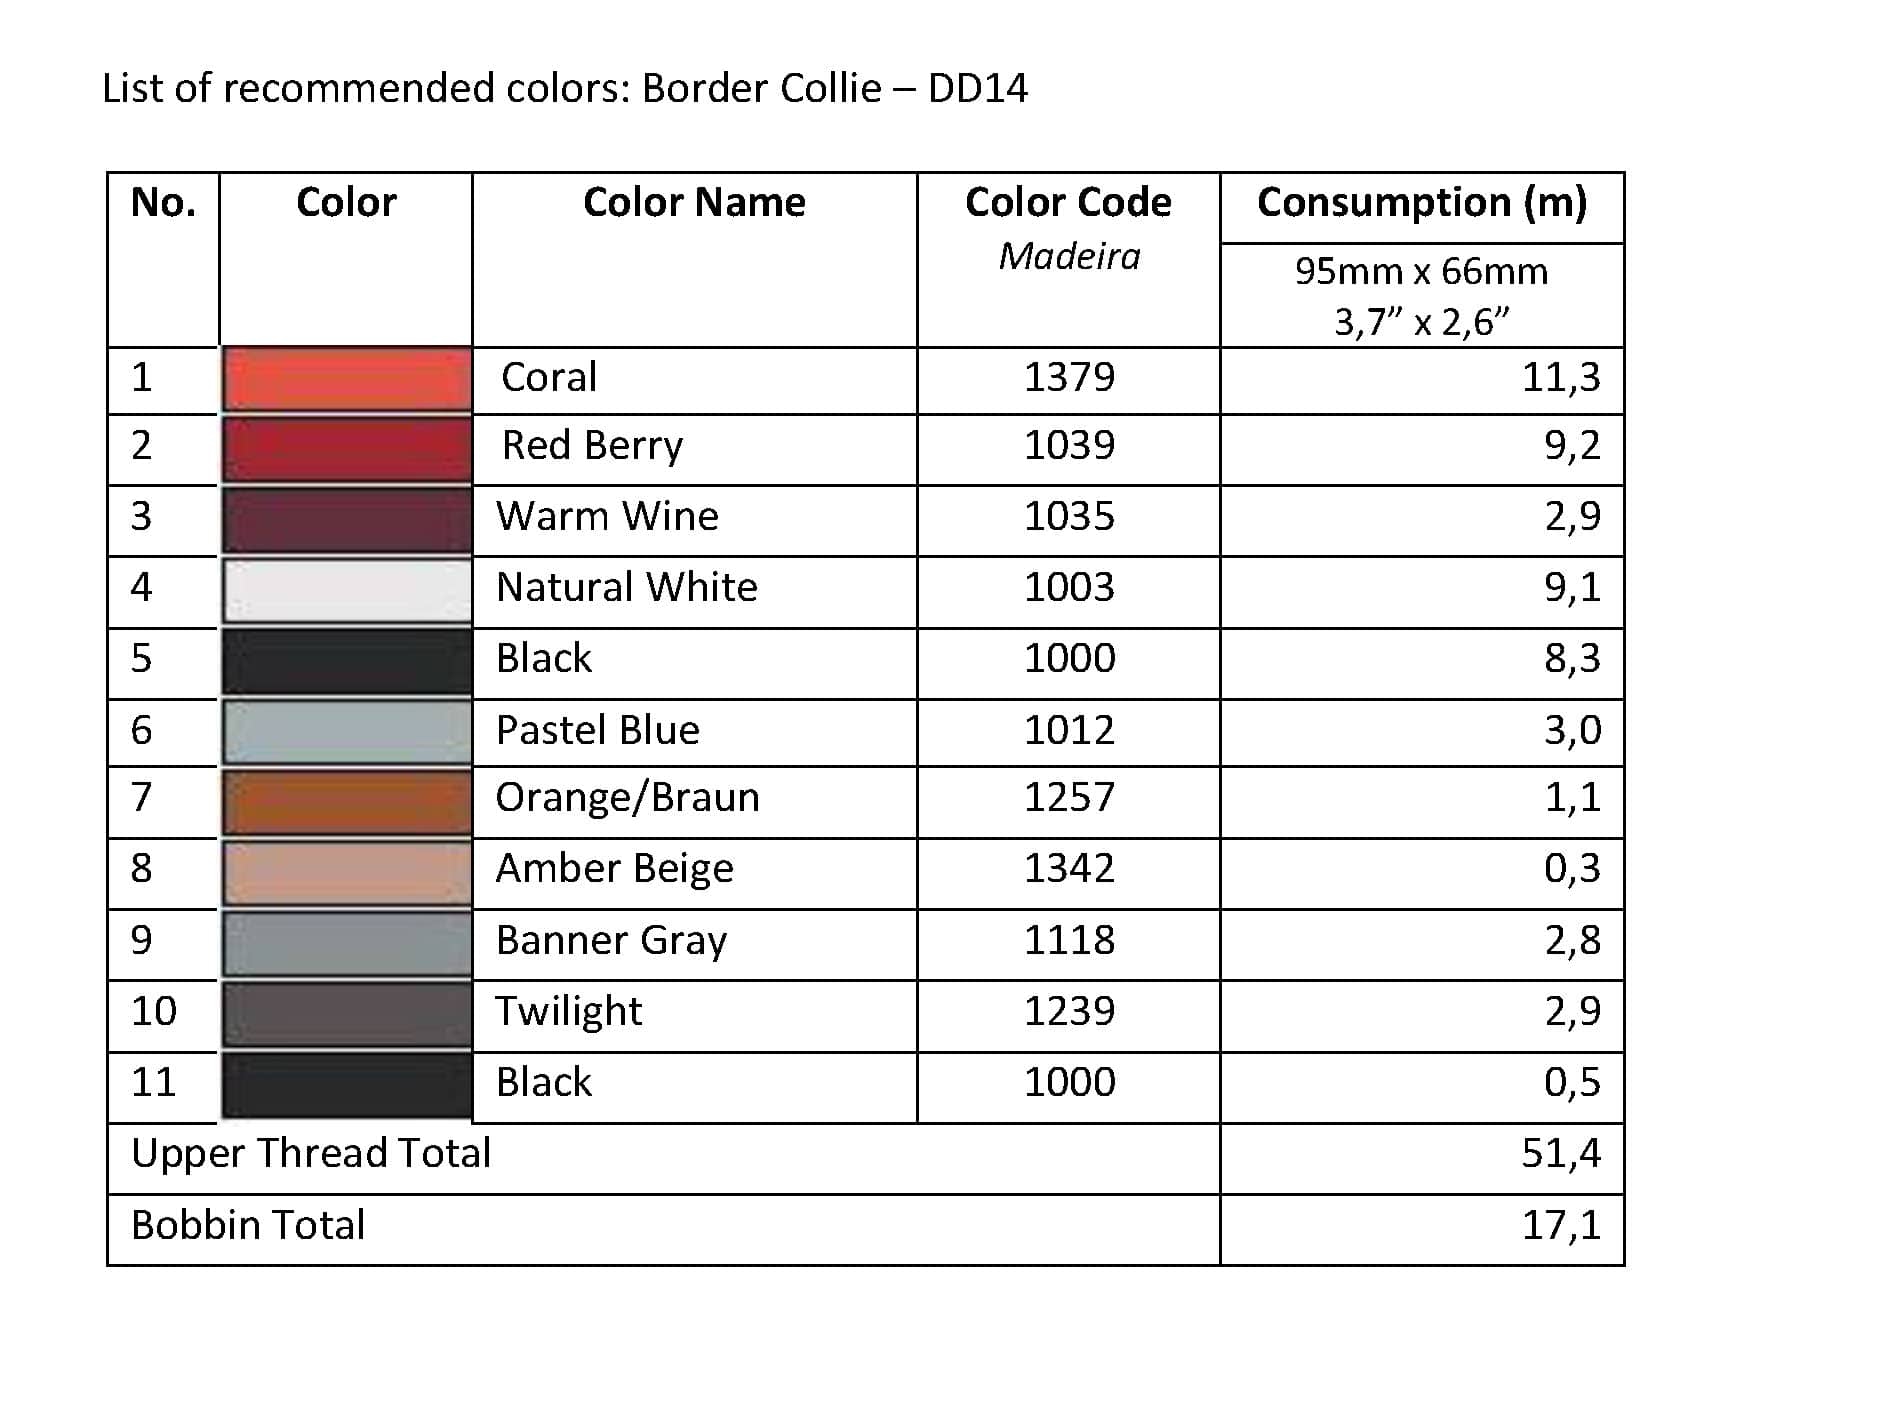 List of Recommended Colors - Border Collie DD14